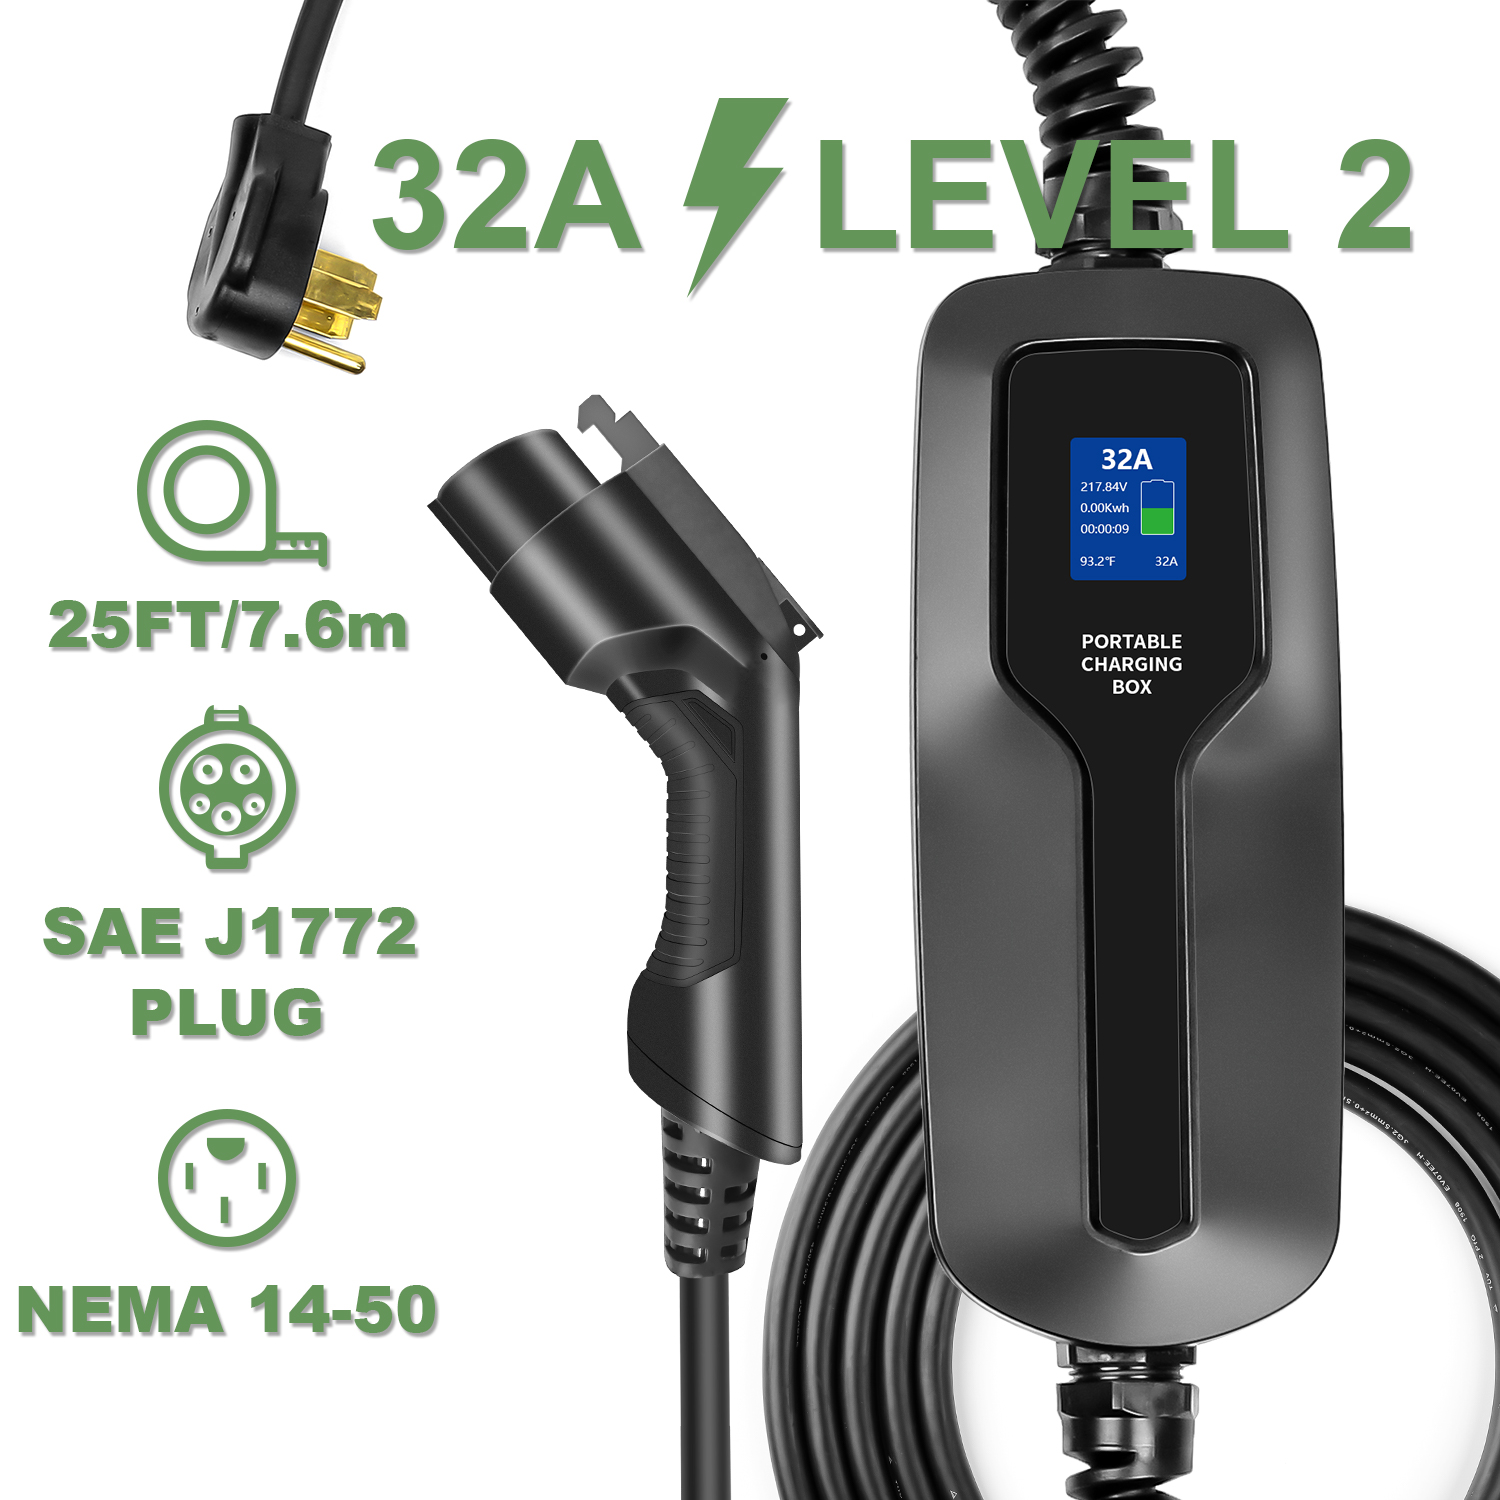 SAE J1772 Standard 110-240V, 10/16A, 20FT lefanev Level 2 EV Charger Cable SCHUKO Portable EVSE Electric Vehicle Charging Station for Chevy Volt,Tesla Model and All Type 1 